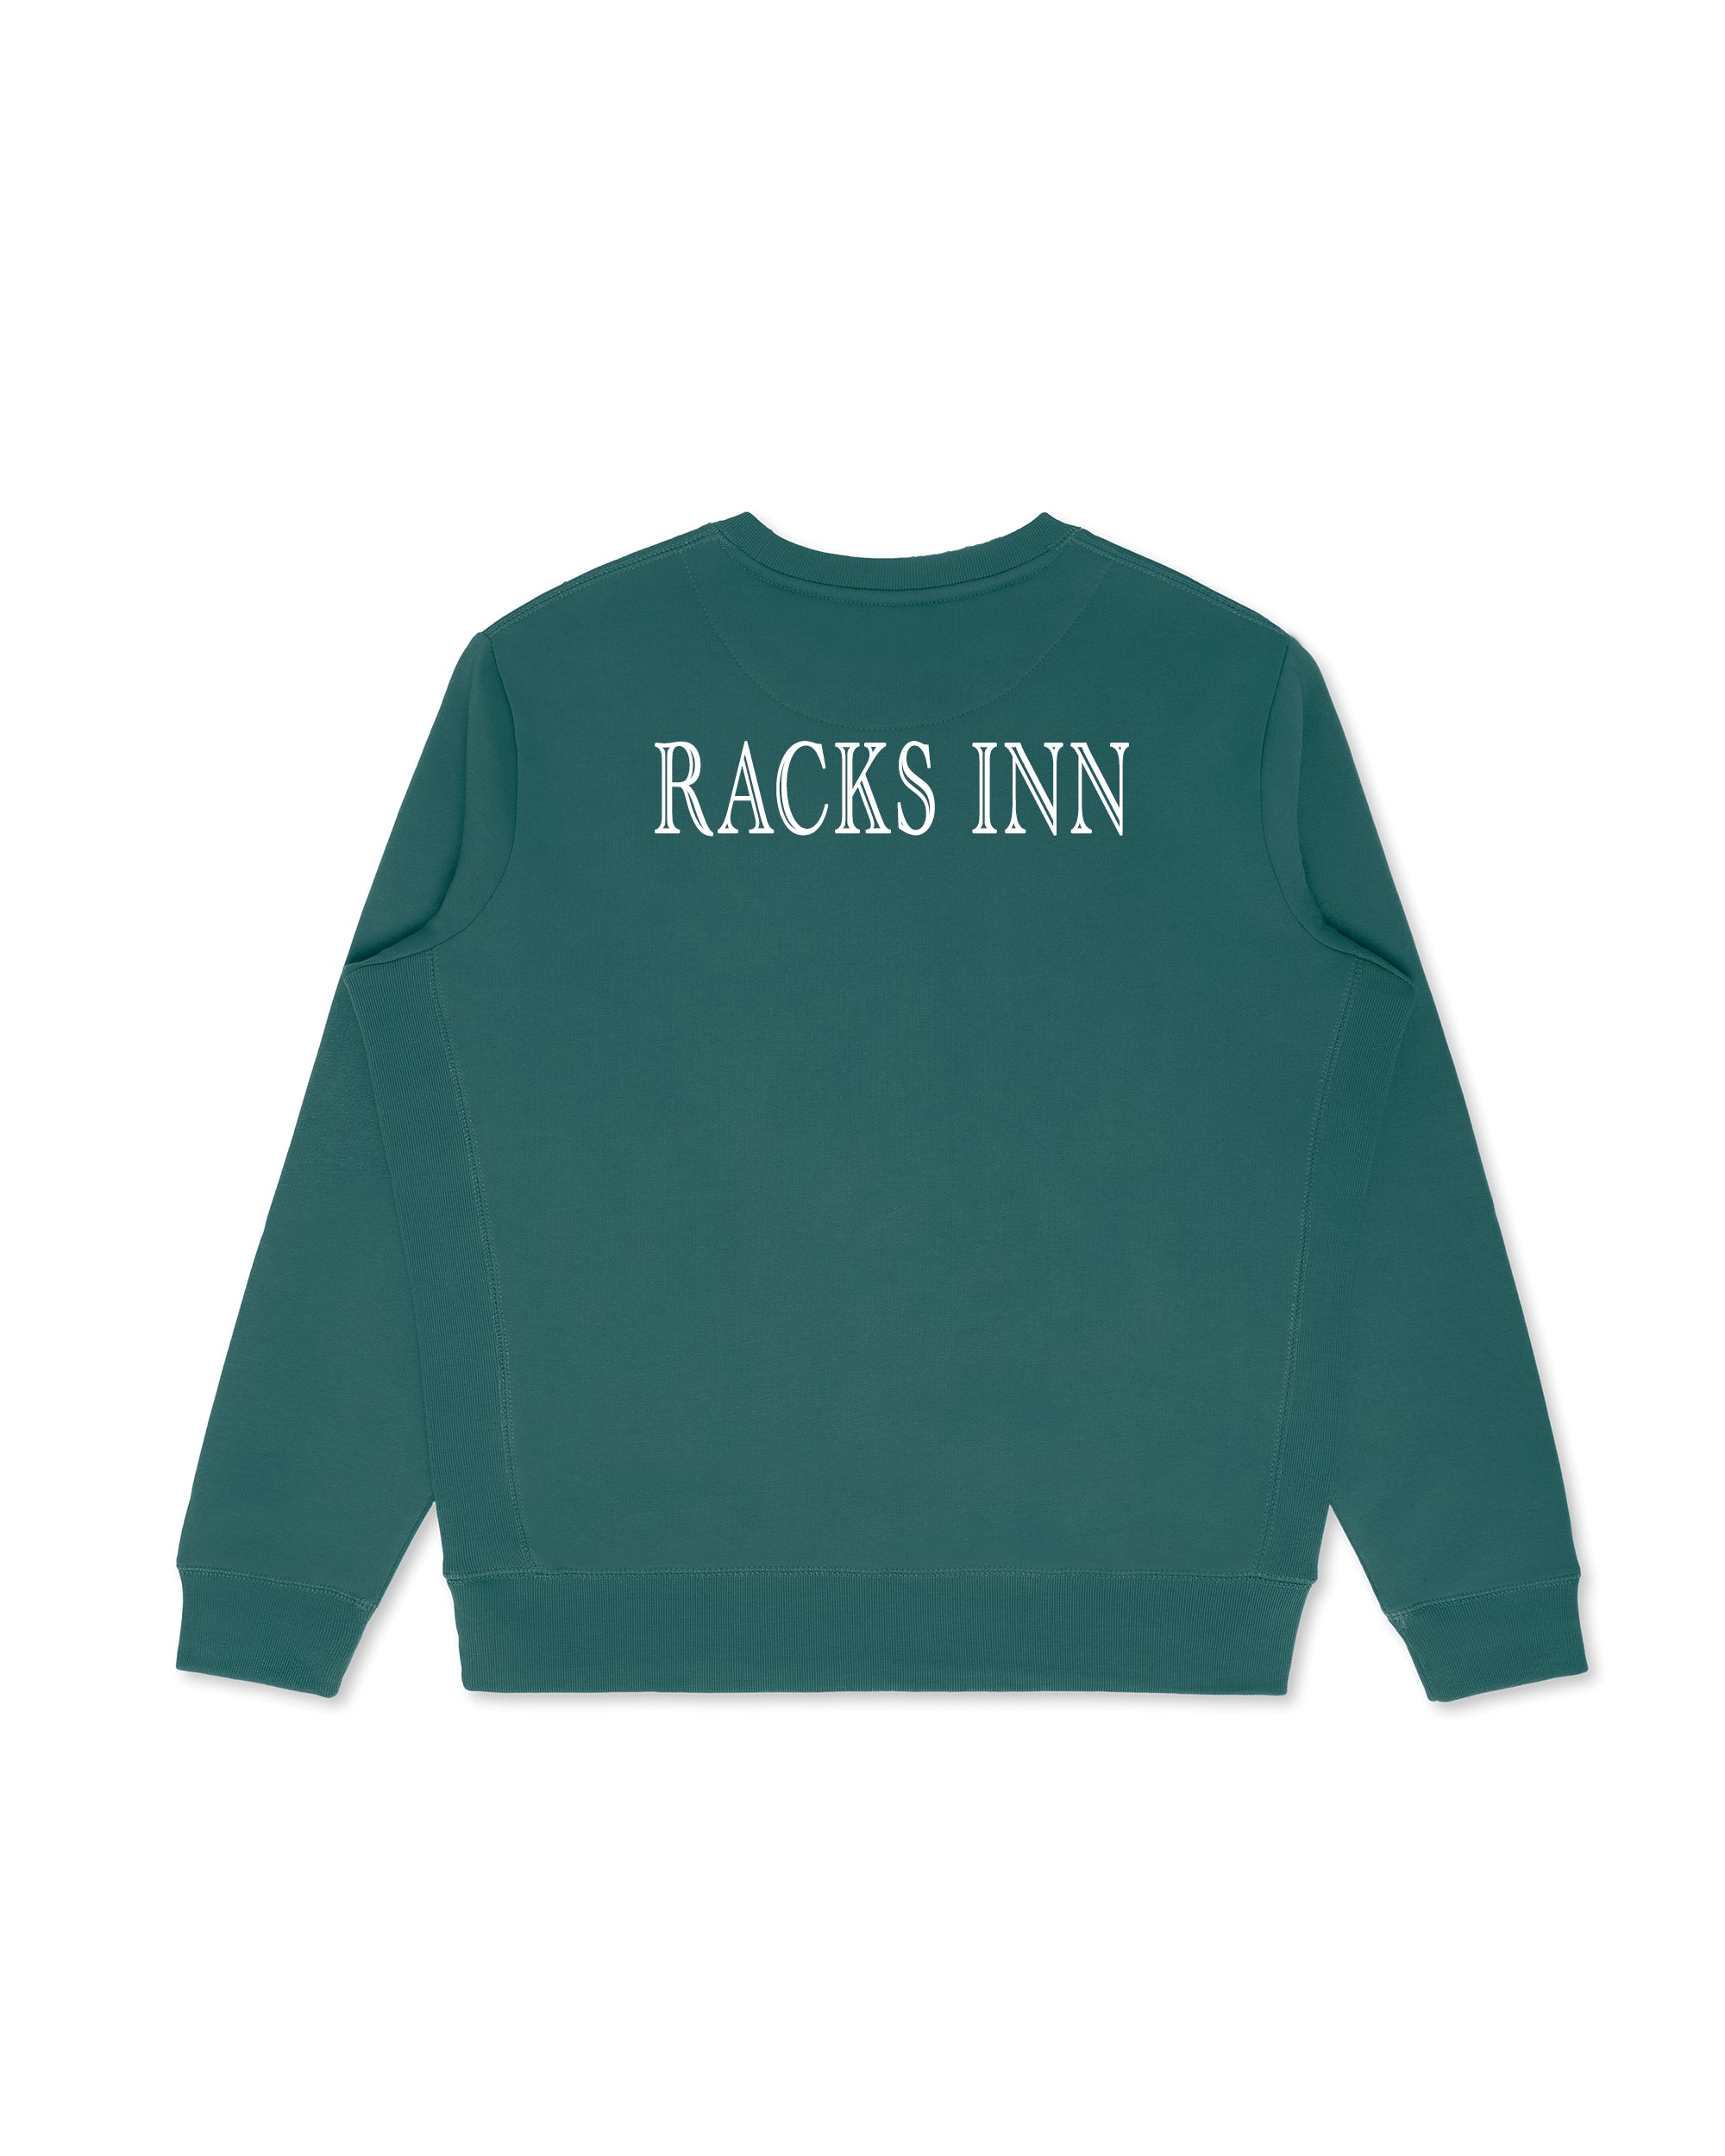 For The Love Crewneck - Teal